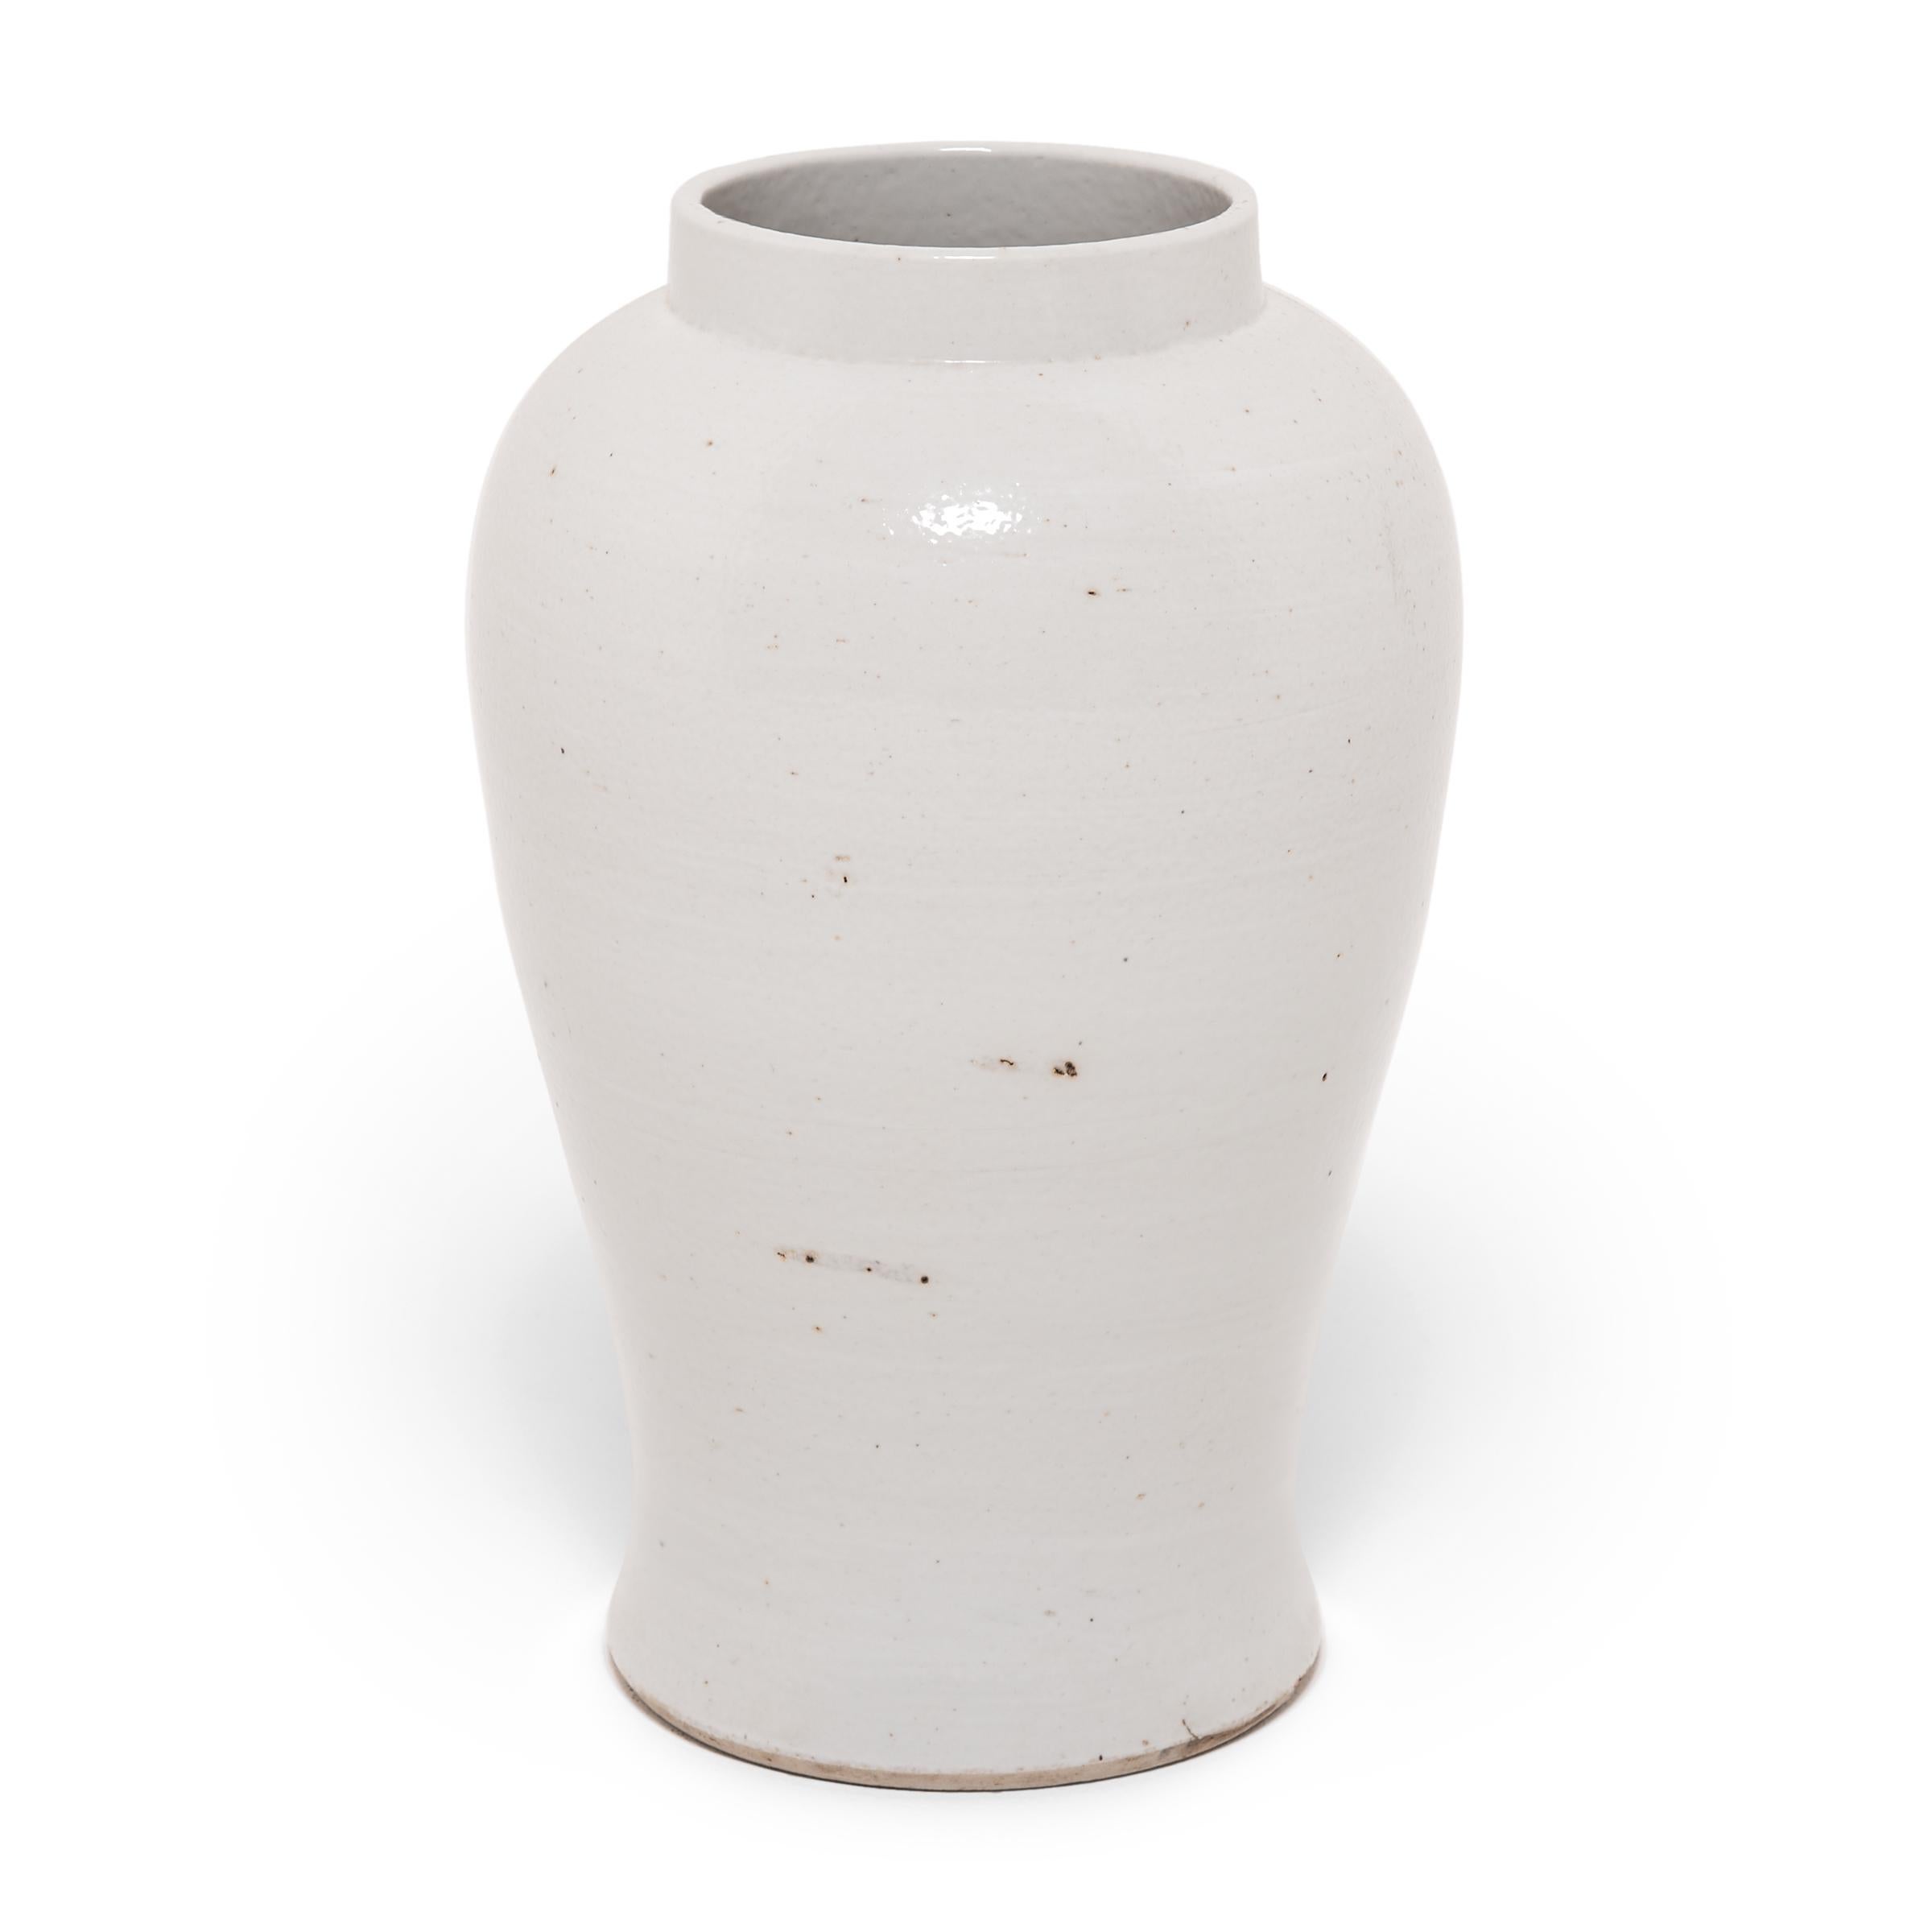 Shaped with high shoulders and a slightly flared base, this porcelain vase is defined by its clean lines and gentle curves. Traditionally elaborately decorated, this modern take is on the baluster jar is cloaked in a simple, milky white glaze to